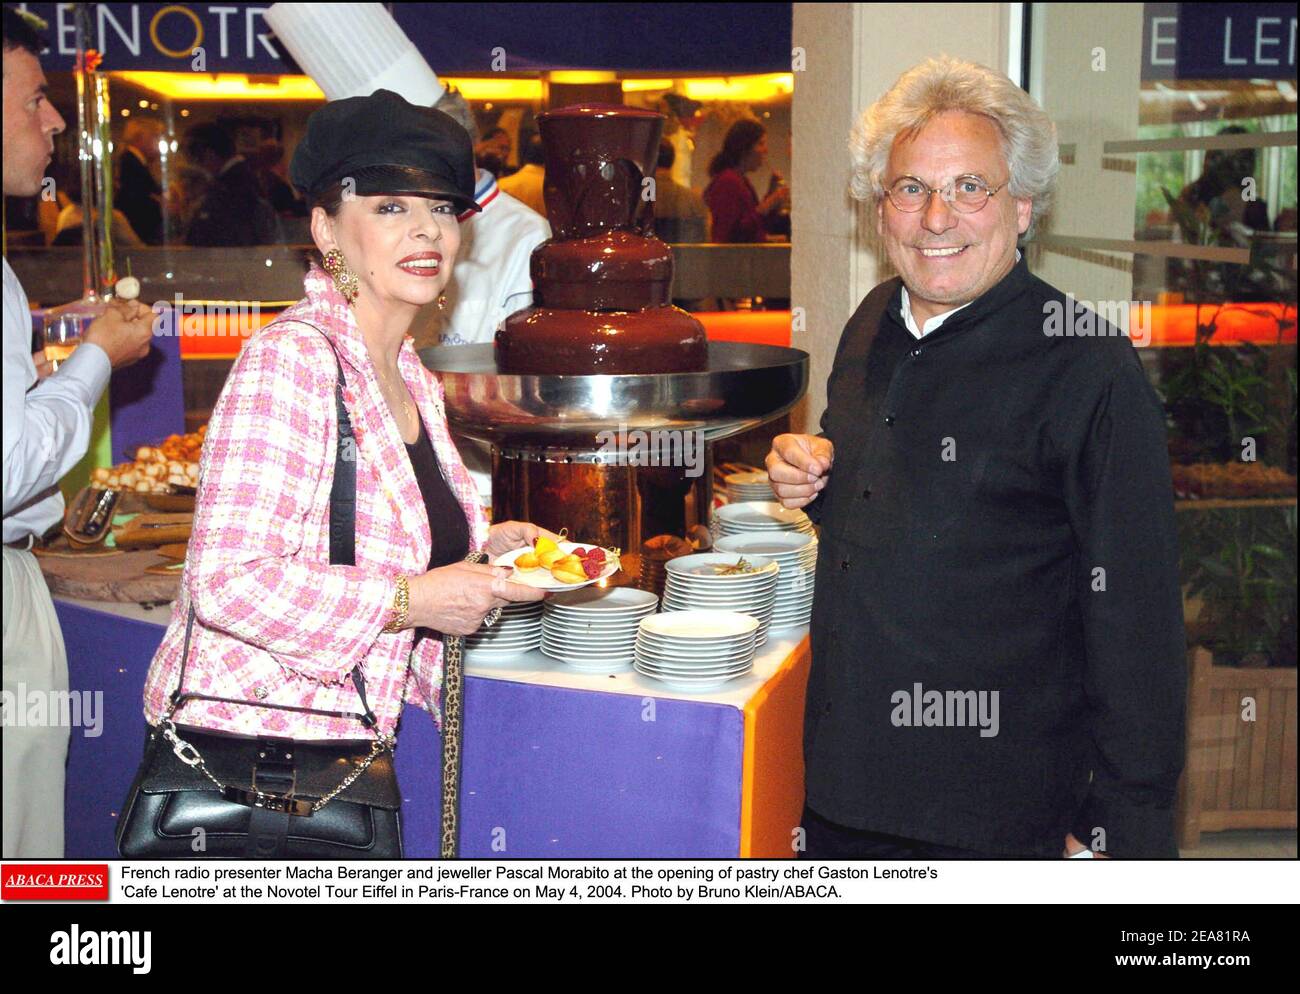 French radio presenter Macha Beranger and jeweller Pascal Morabito at the  opening of pastry chef Gaston Lenotre's 'Cafe Lenotre' at the Novotel Tour  Eiffel in Paris-France on May 4, 2004. Photo by